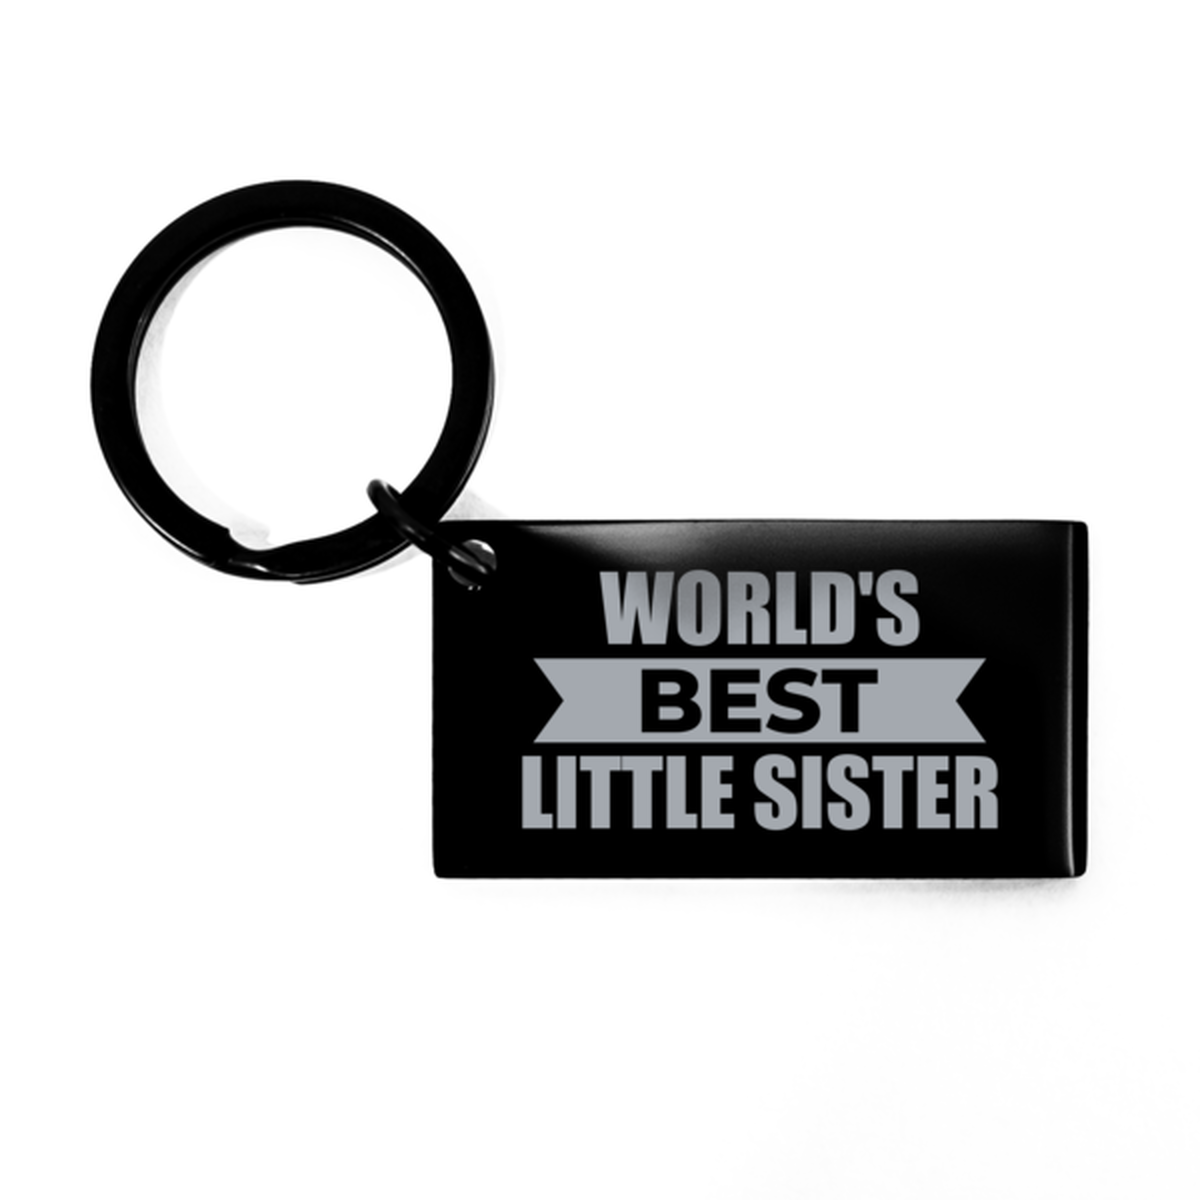 Worlds Best Little Sister Gifts, Funny Black Engraved Keychain For Little Sister, Birthday Presents For Women